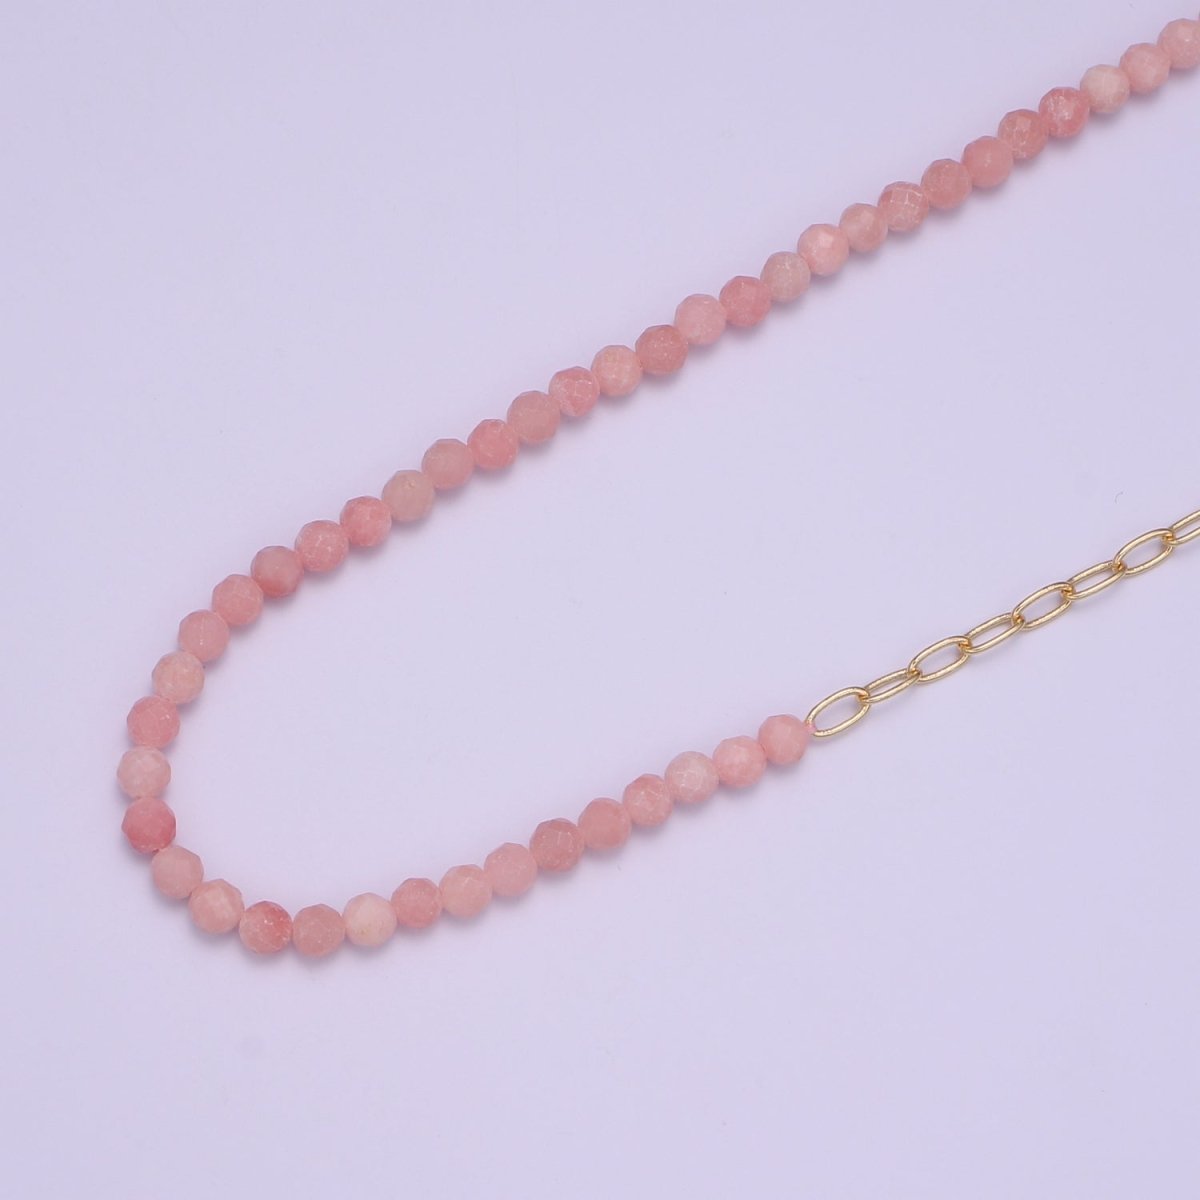 Mixed Chain Necklace, Fused Pink Quartz Beads necklace w/ 14k Gold Filled Necklace, Cable Link Chain Necklace Ready To Wear Necklace - DLUXCA